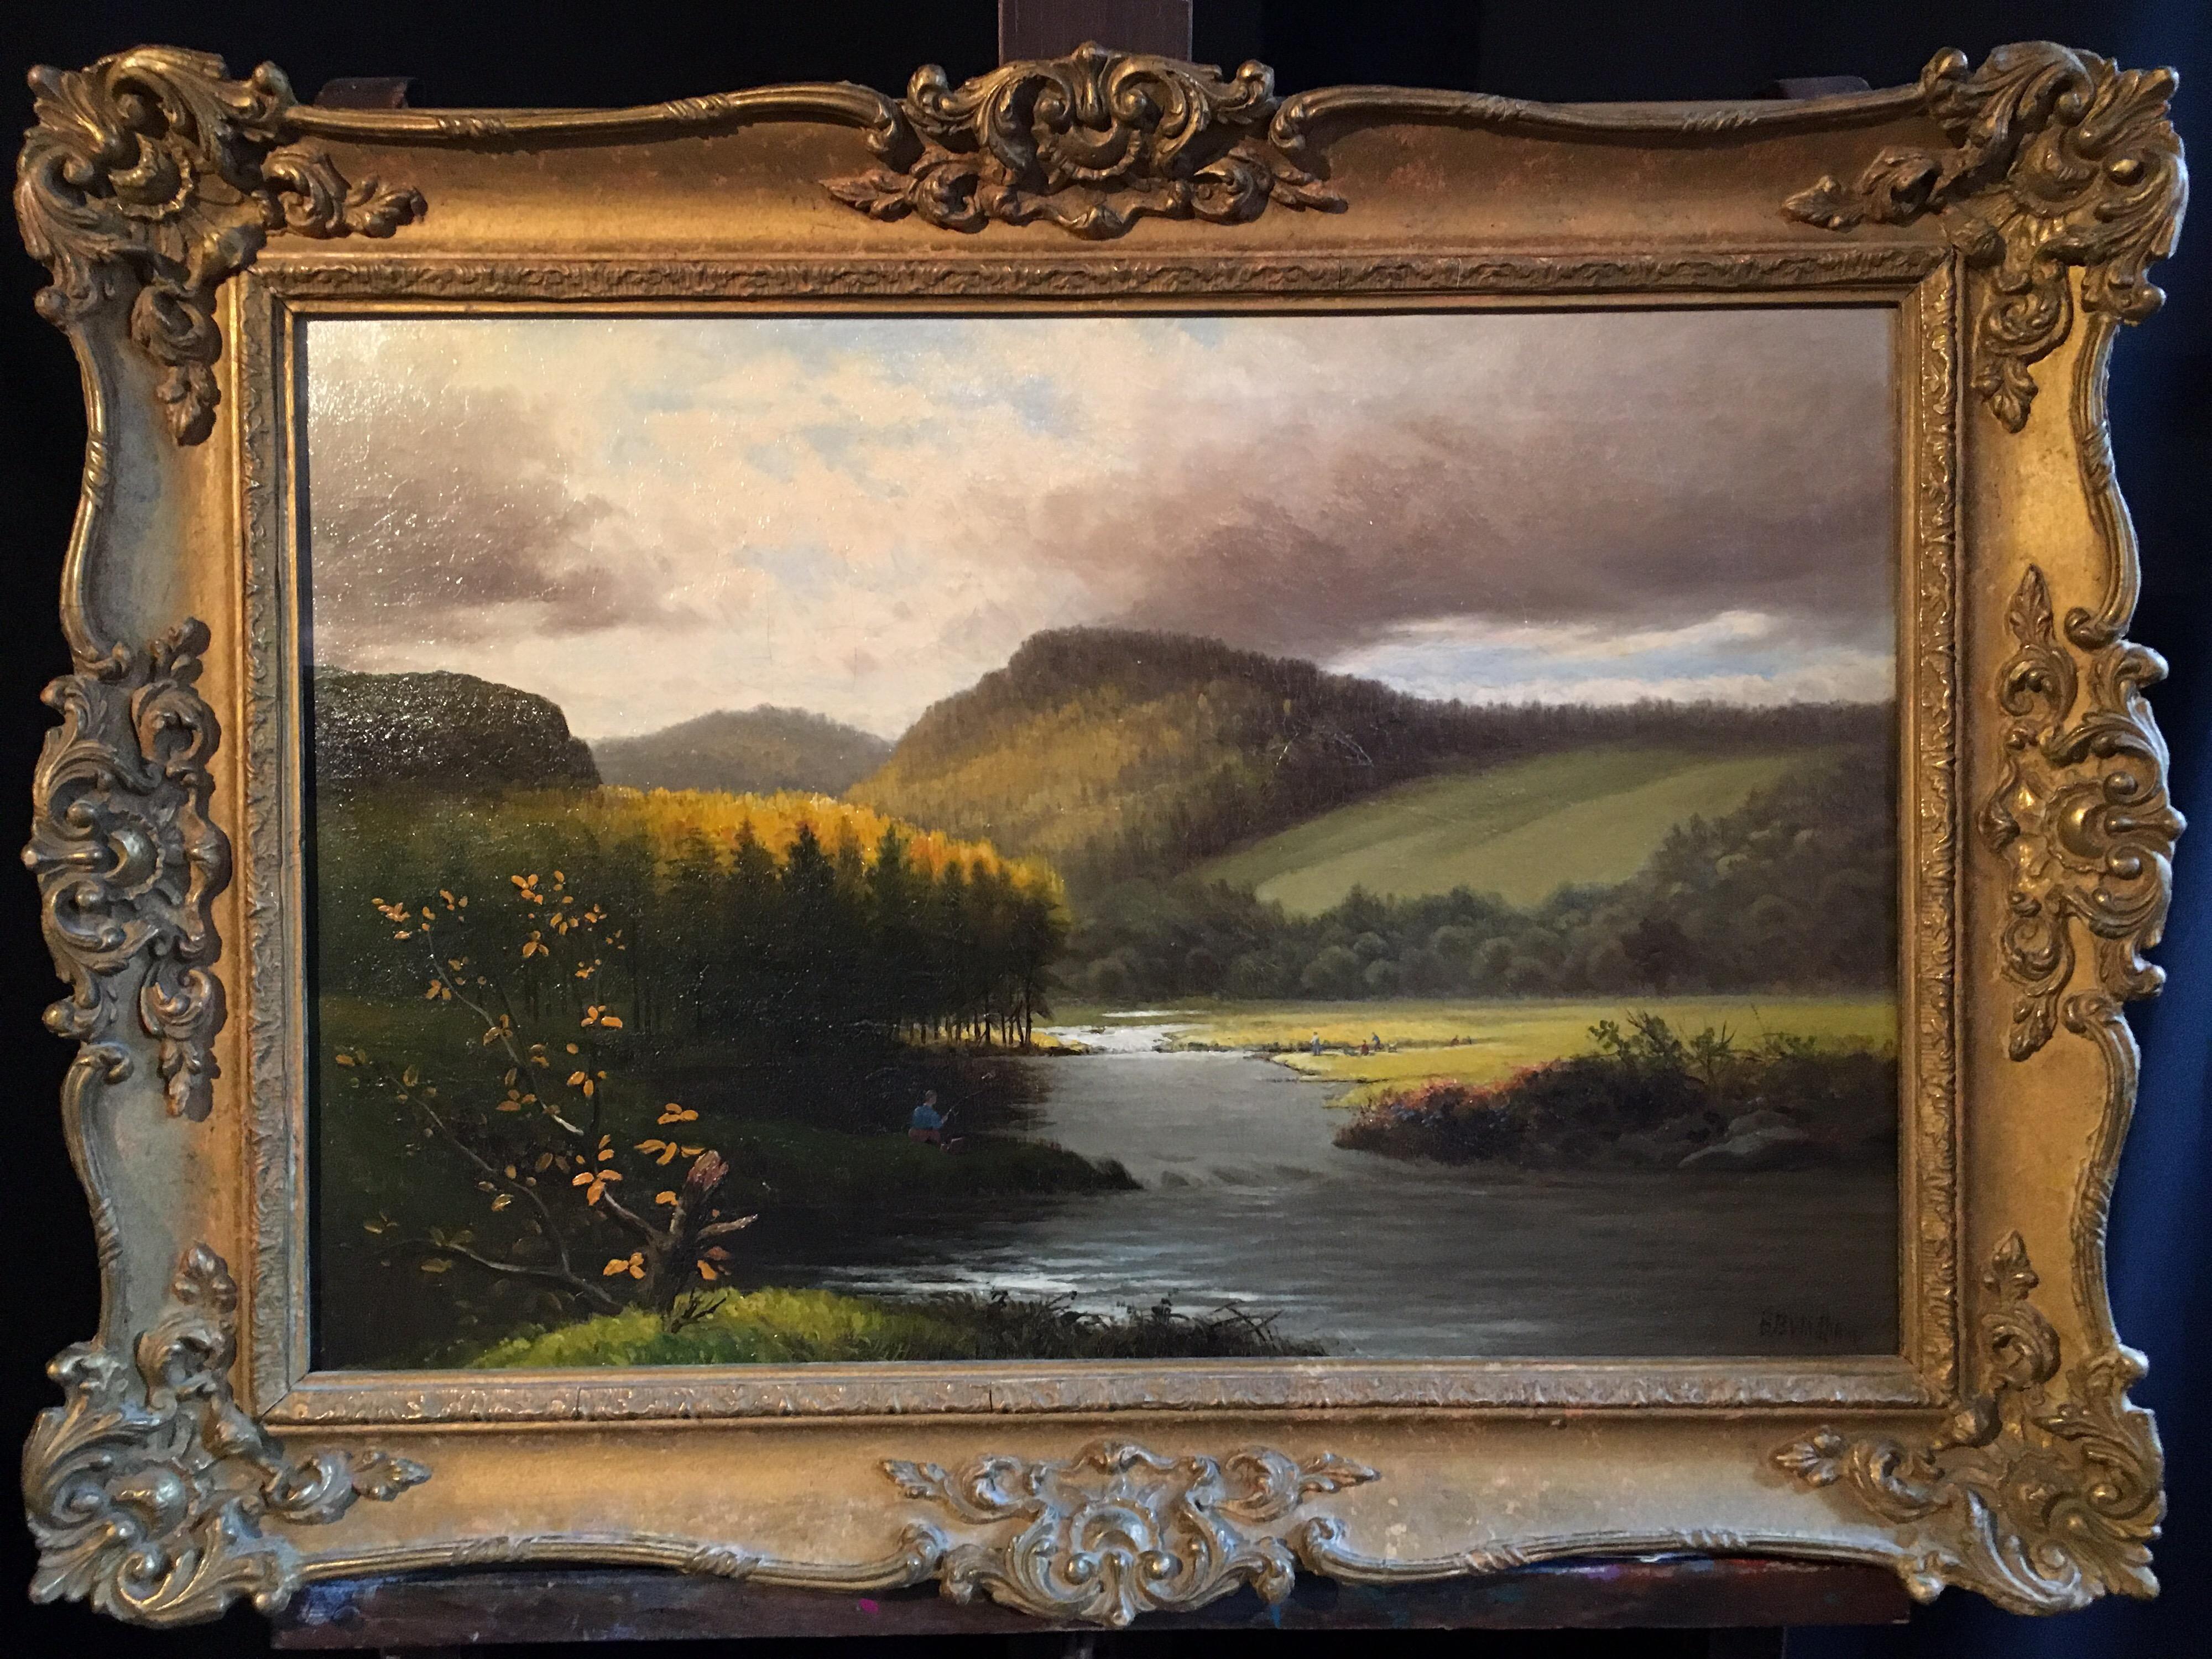 Breathtaking Estuary, Antique British Landscape OIl Painting, Dated & Signed - Brown Landscape Painting by BB Wadham